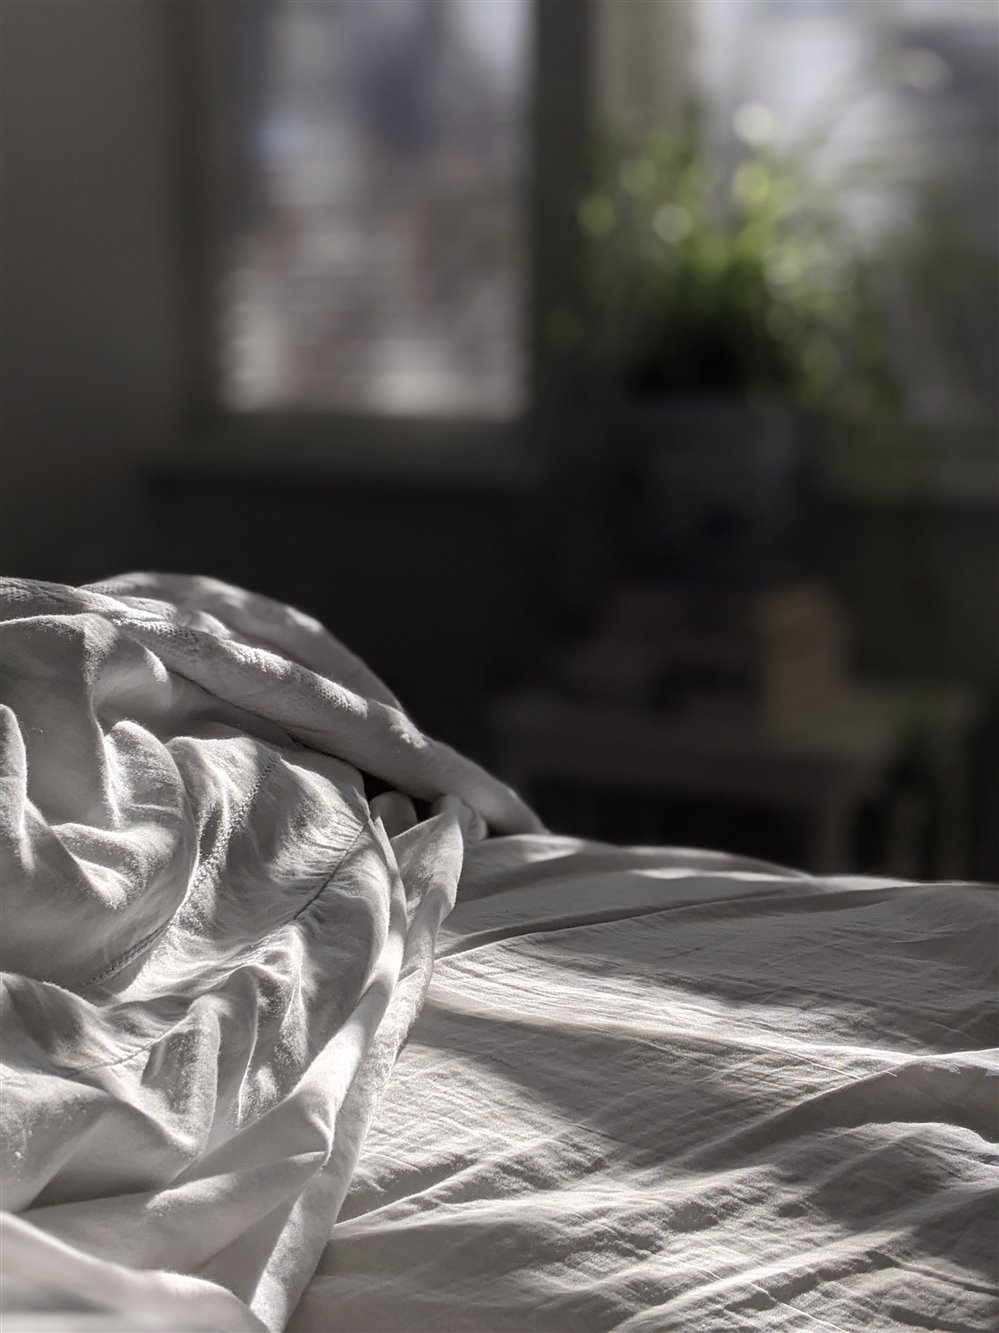 A photograph of an unmade bed, with light coming through blinds